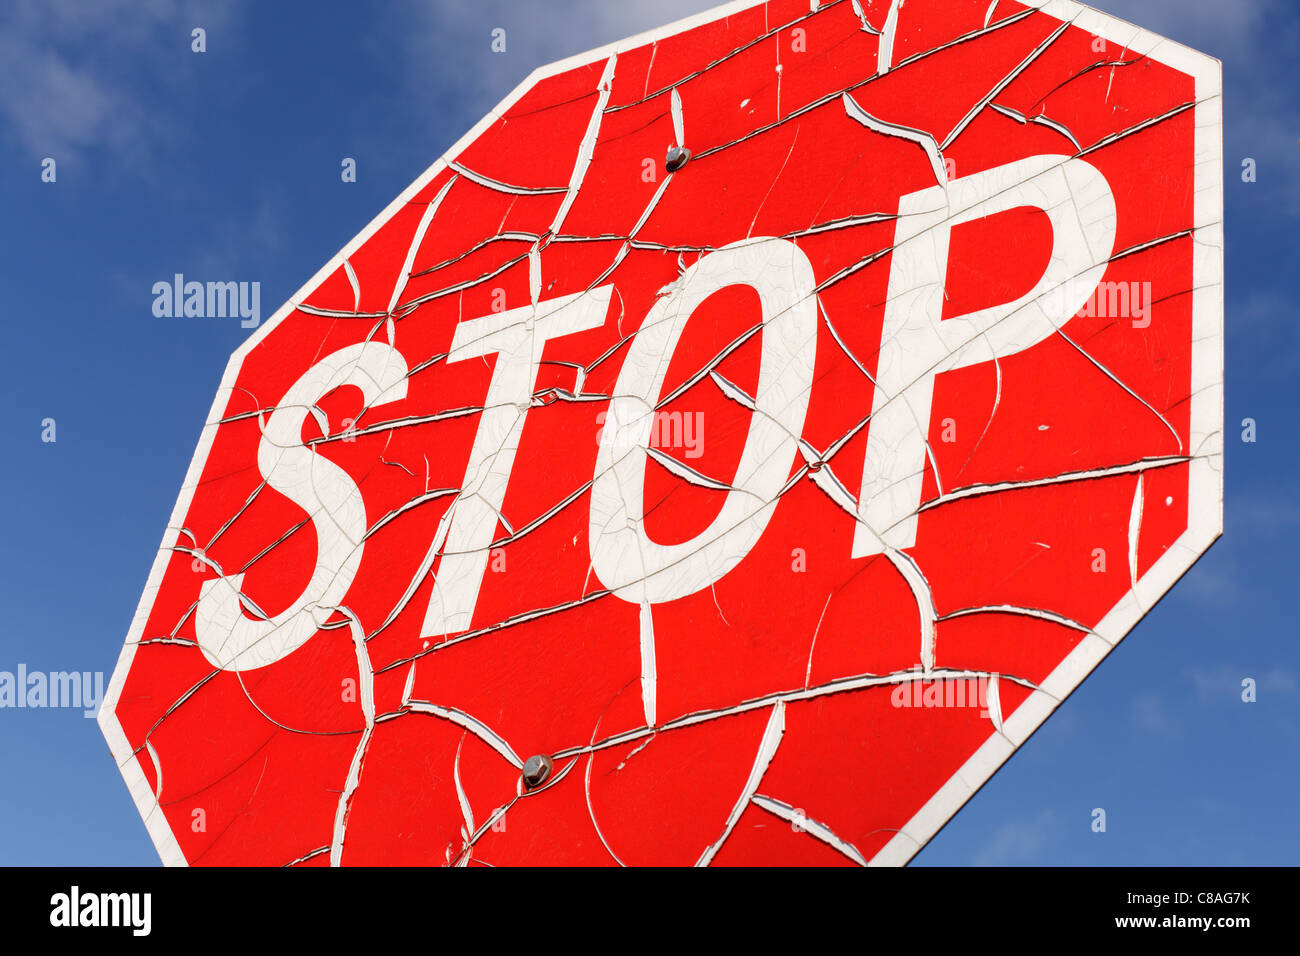 A cracked and worn stop sign against blue sky. Stock Photo